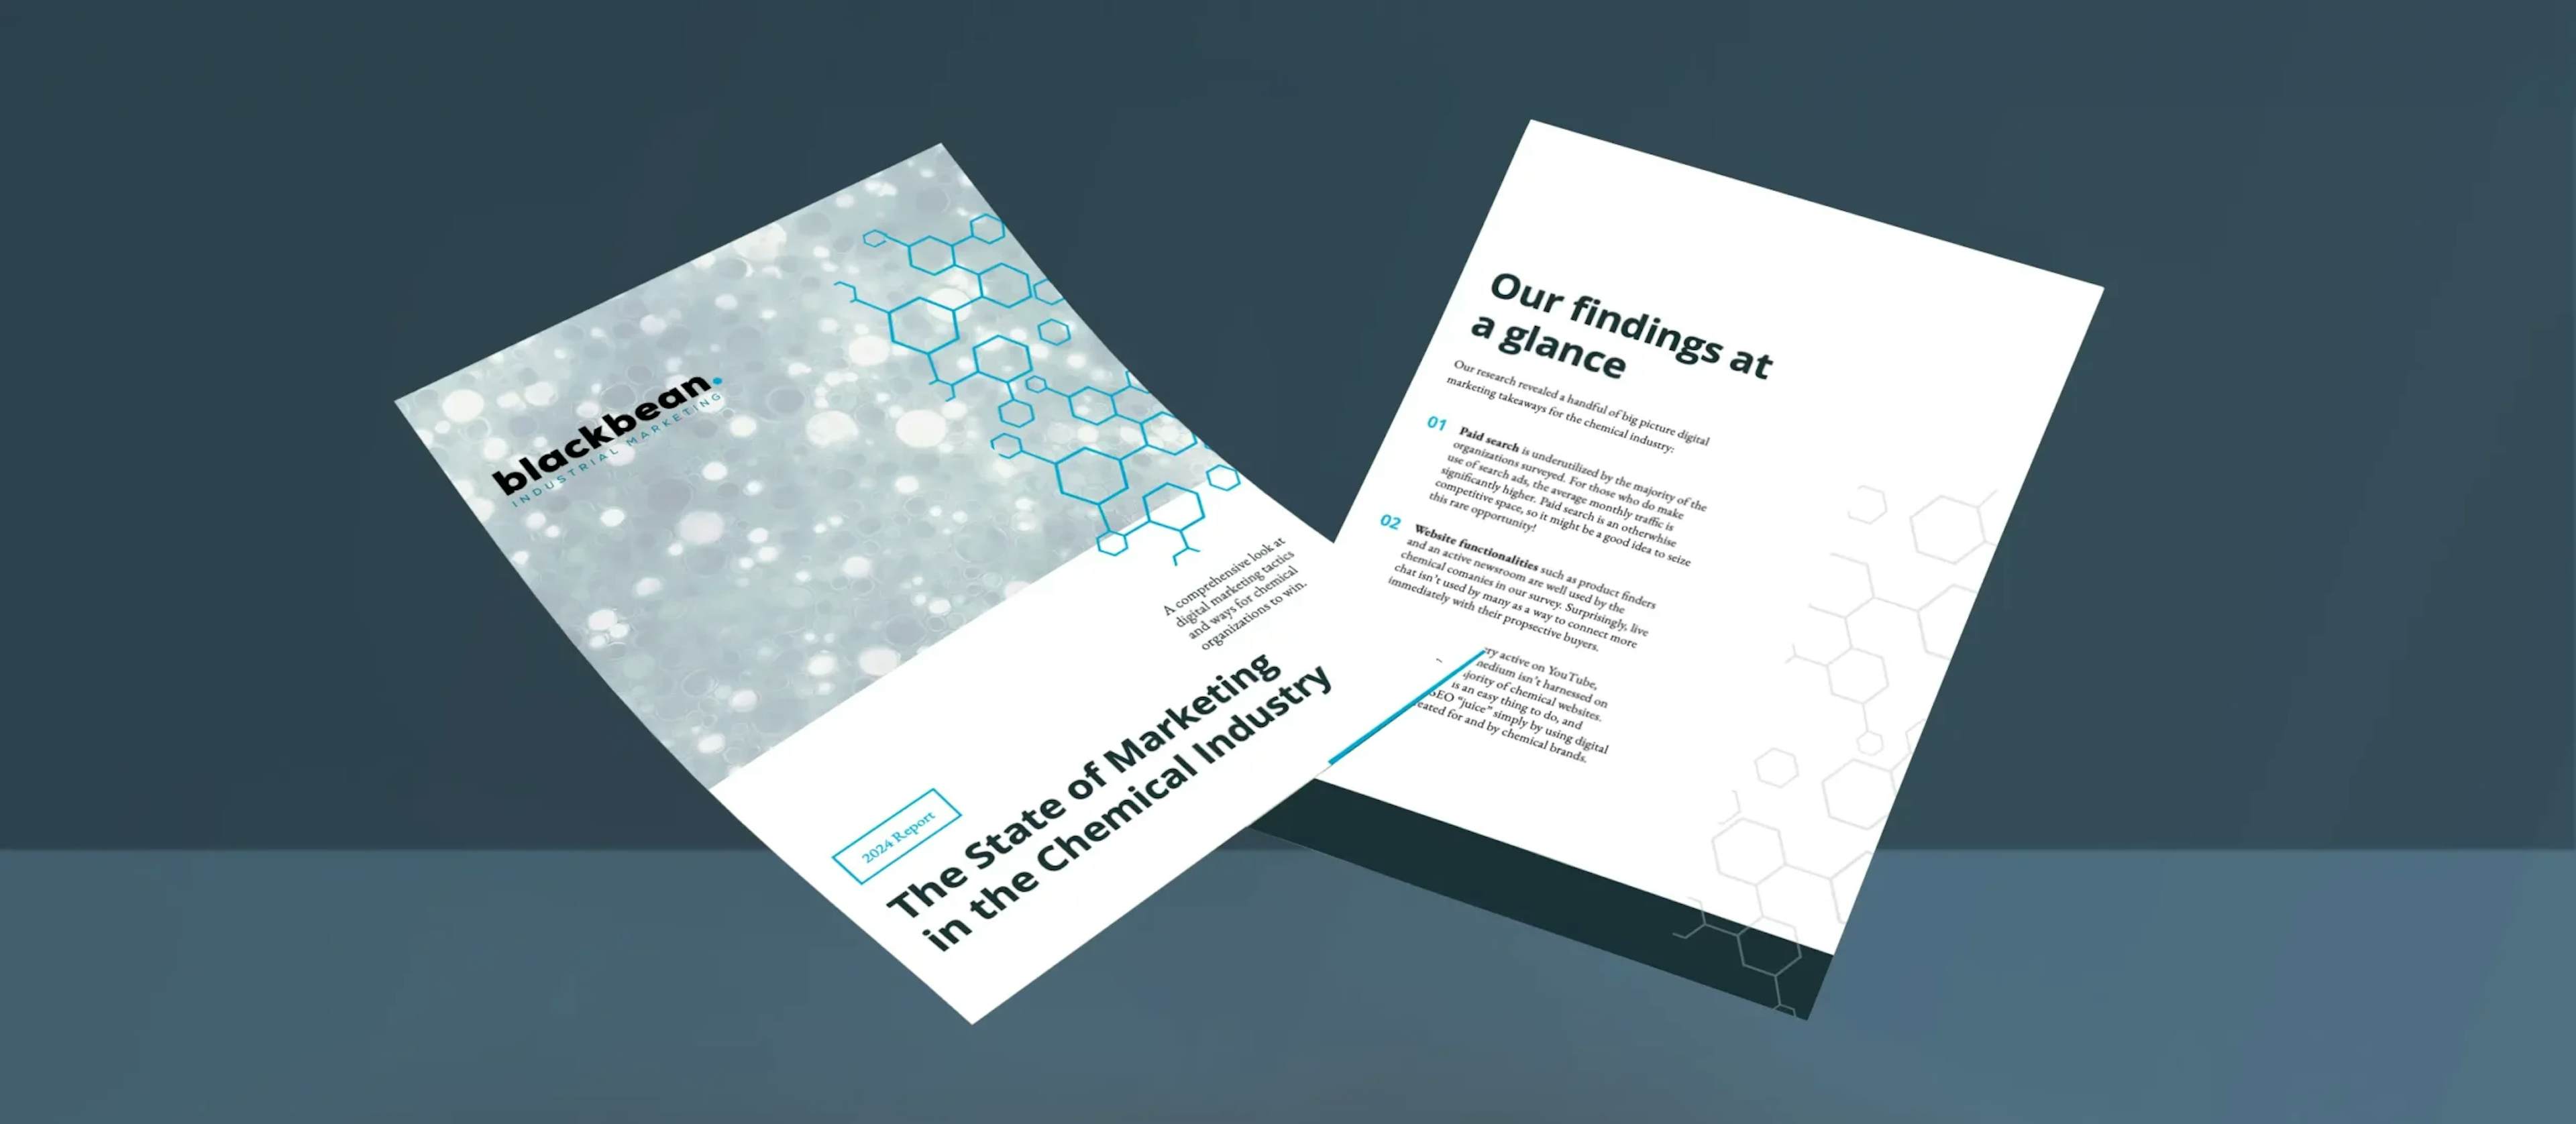 State of Digital Marketing in the Chemical Industry Report!